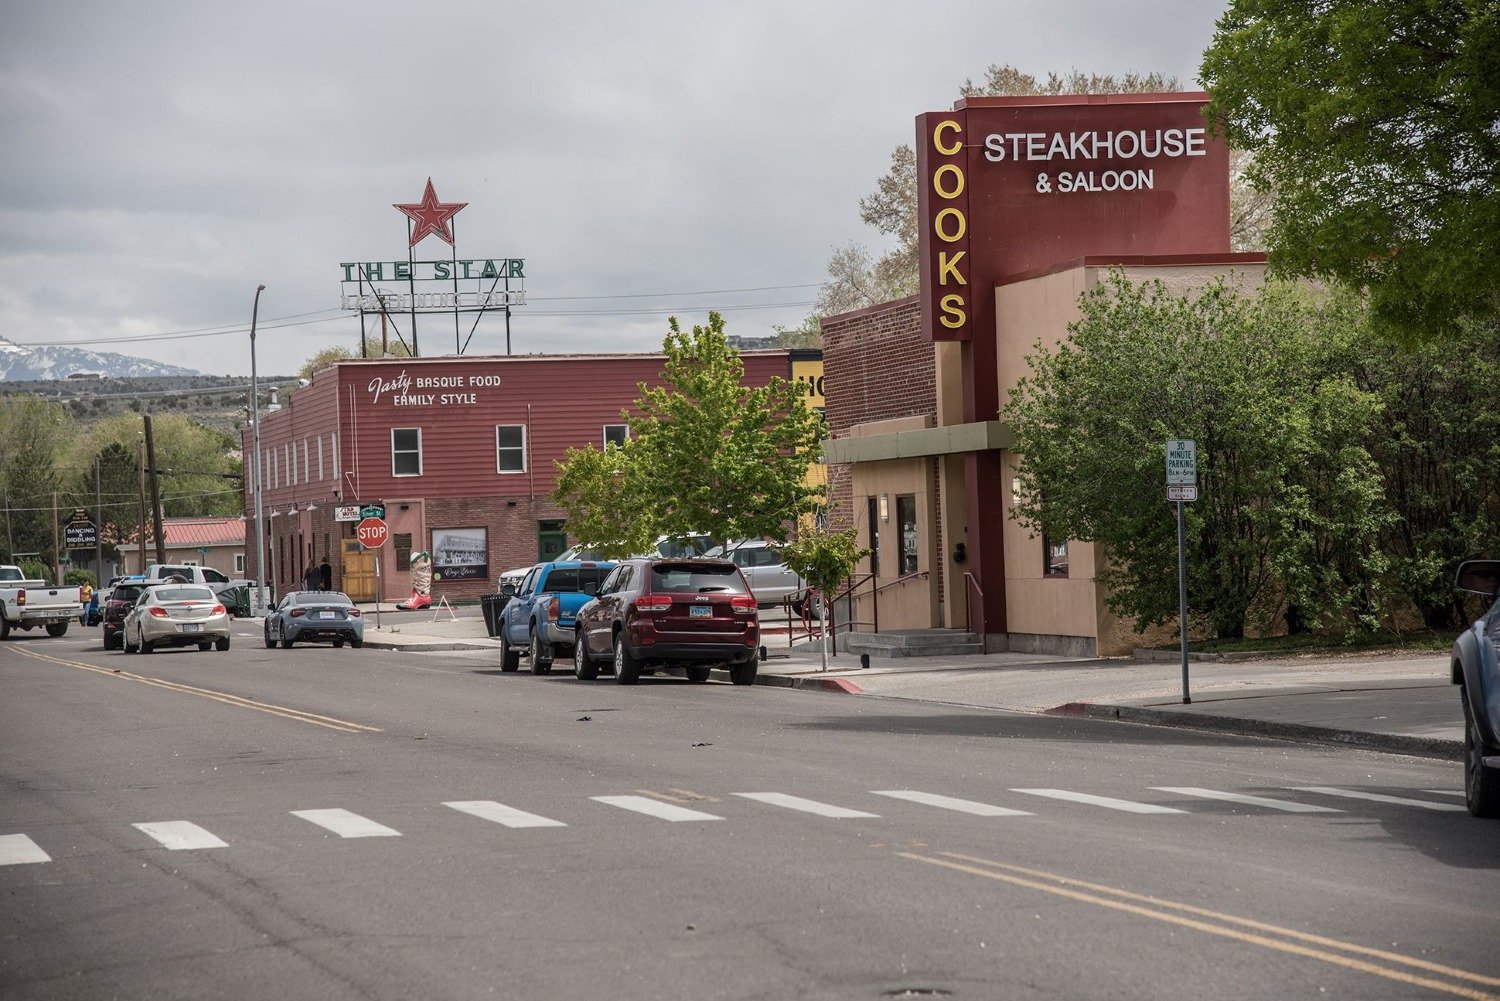 Elko Down Town Cooks steakhouse Star Hotel photo by Allusive Images.jpg